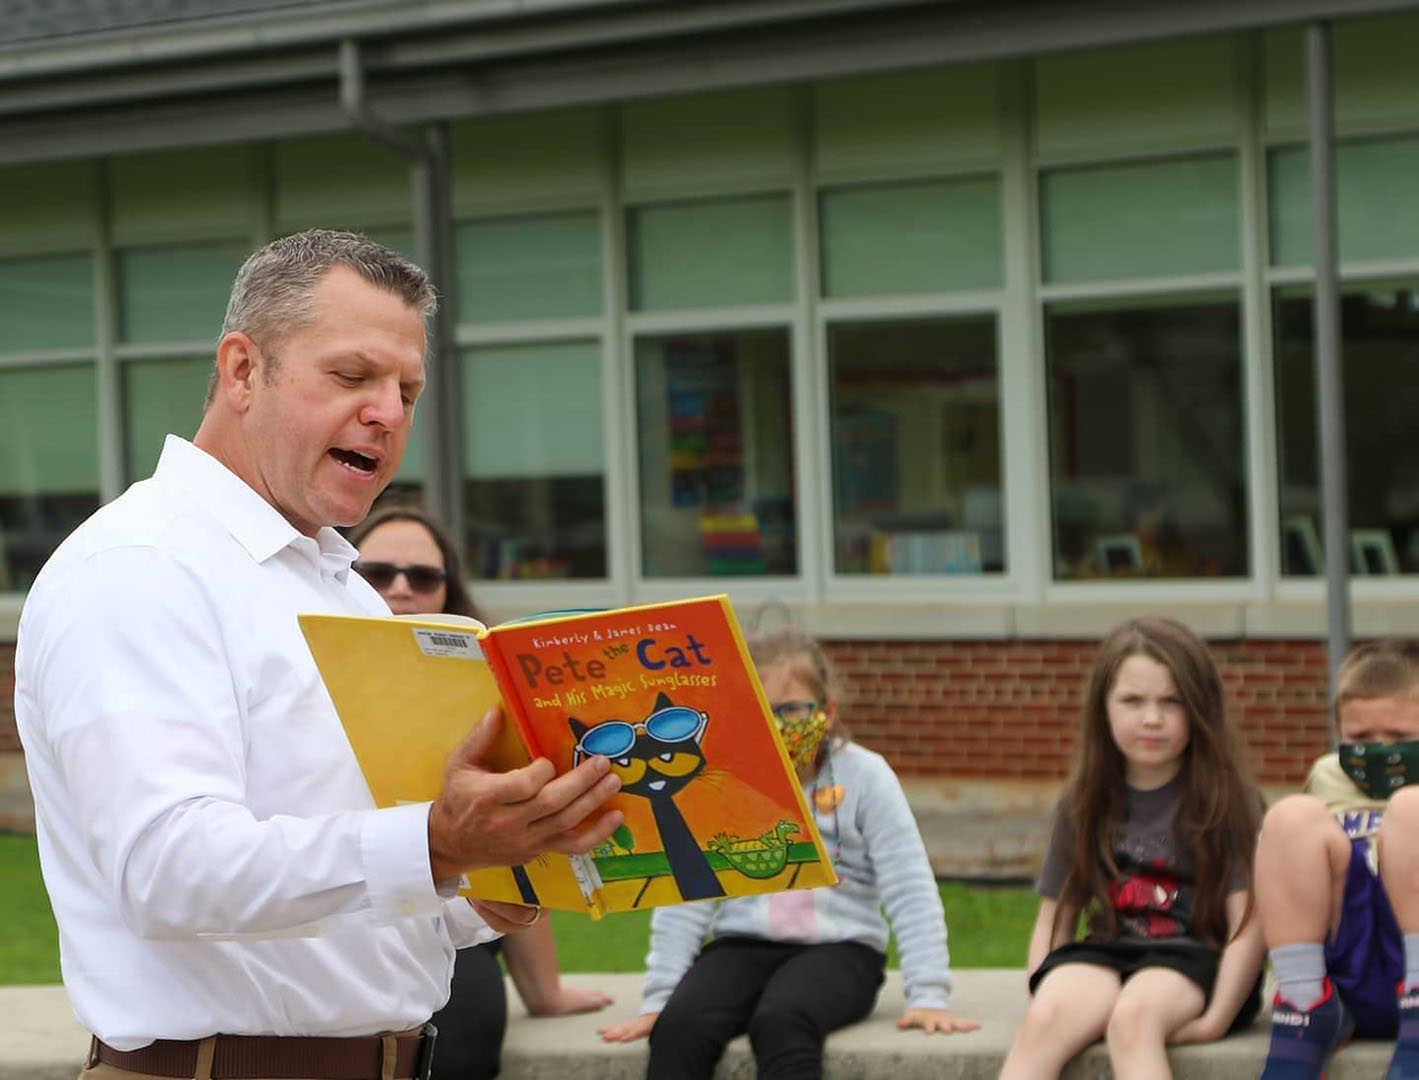 A man holding a book reads to children sitting outside.